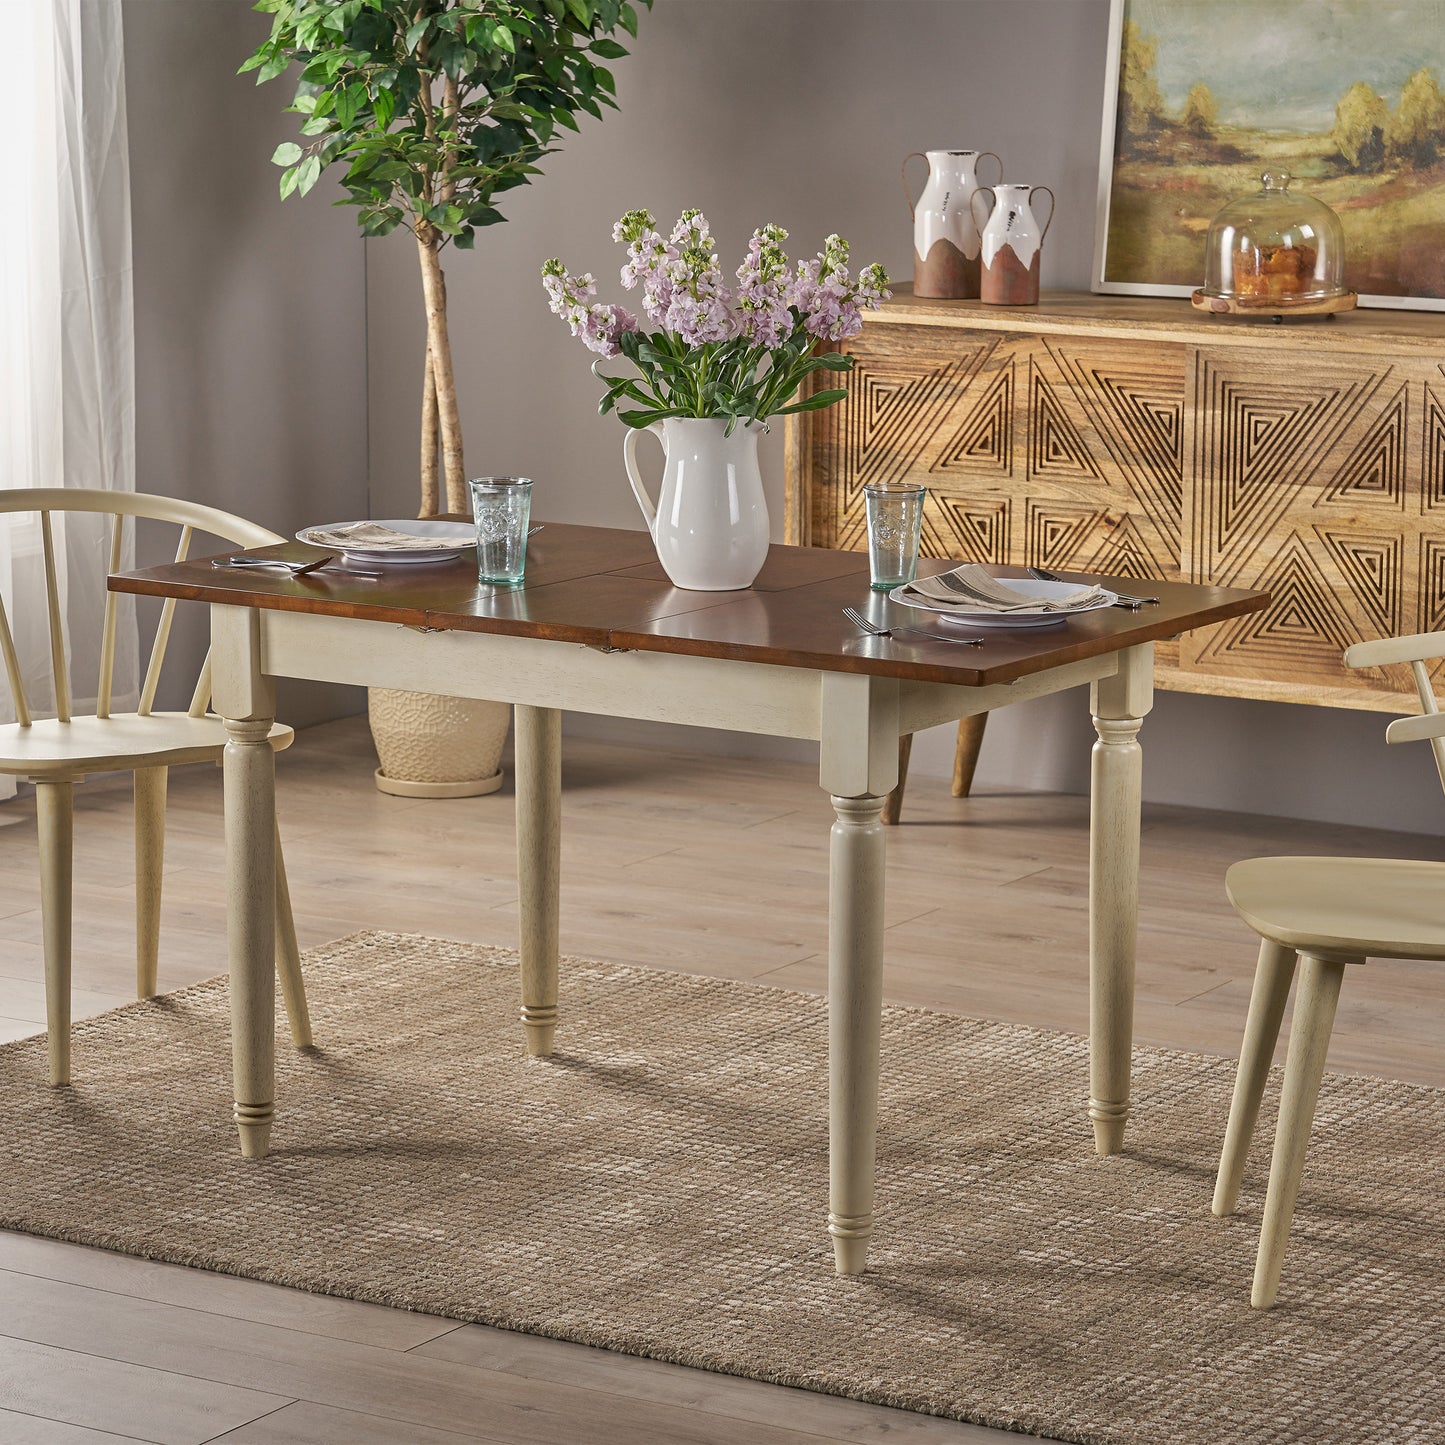 Broughton Rustic Wood Dining Table with Extendable Leaf, Dark Oak and Antique White